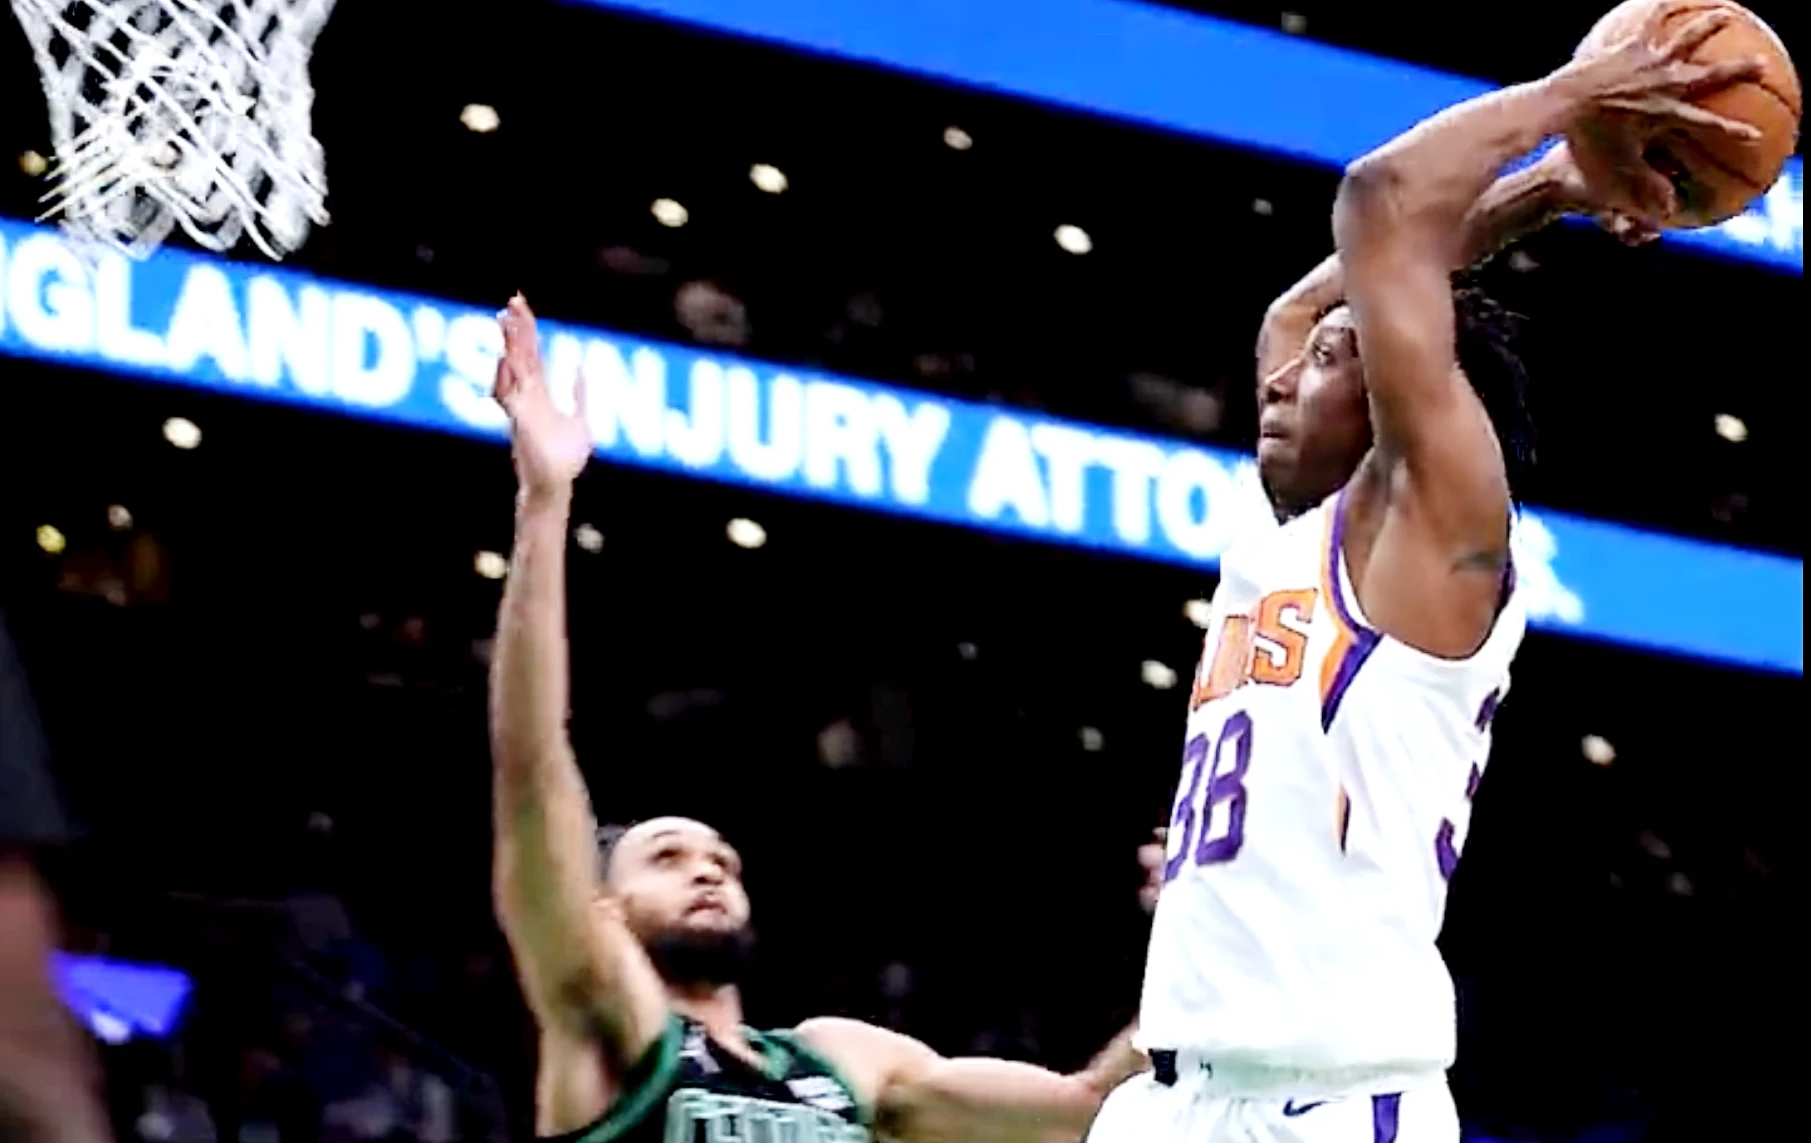 Saben Lee of Phoenix Suns dunks during the game against the Celtics